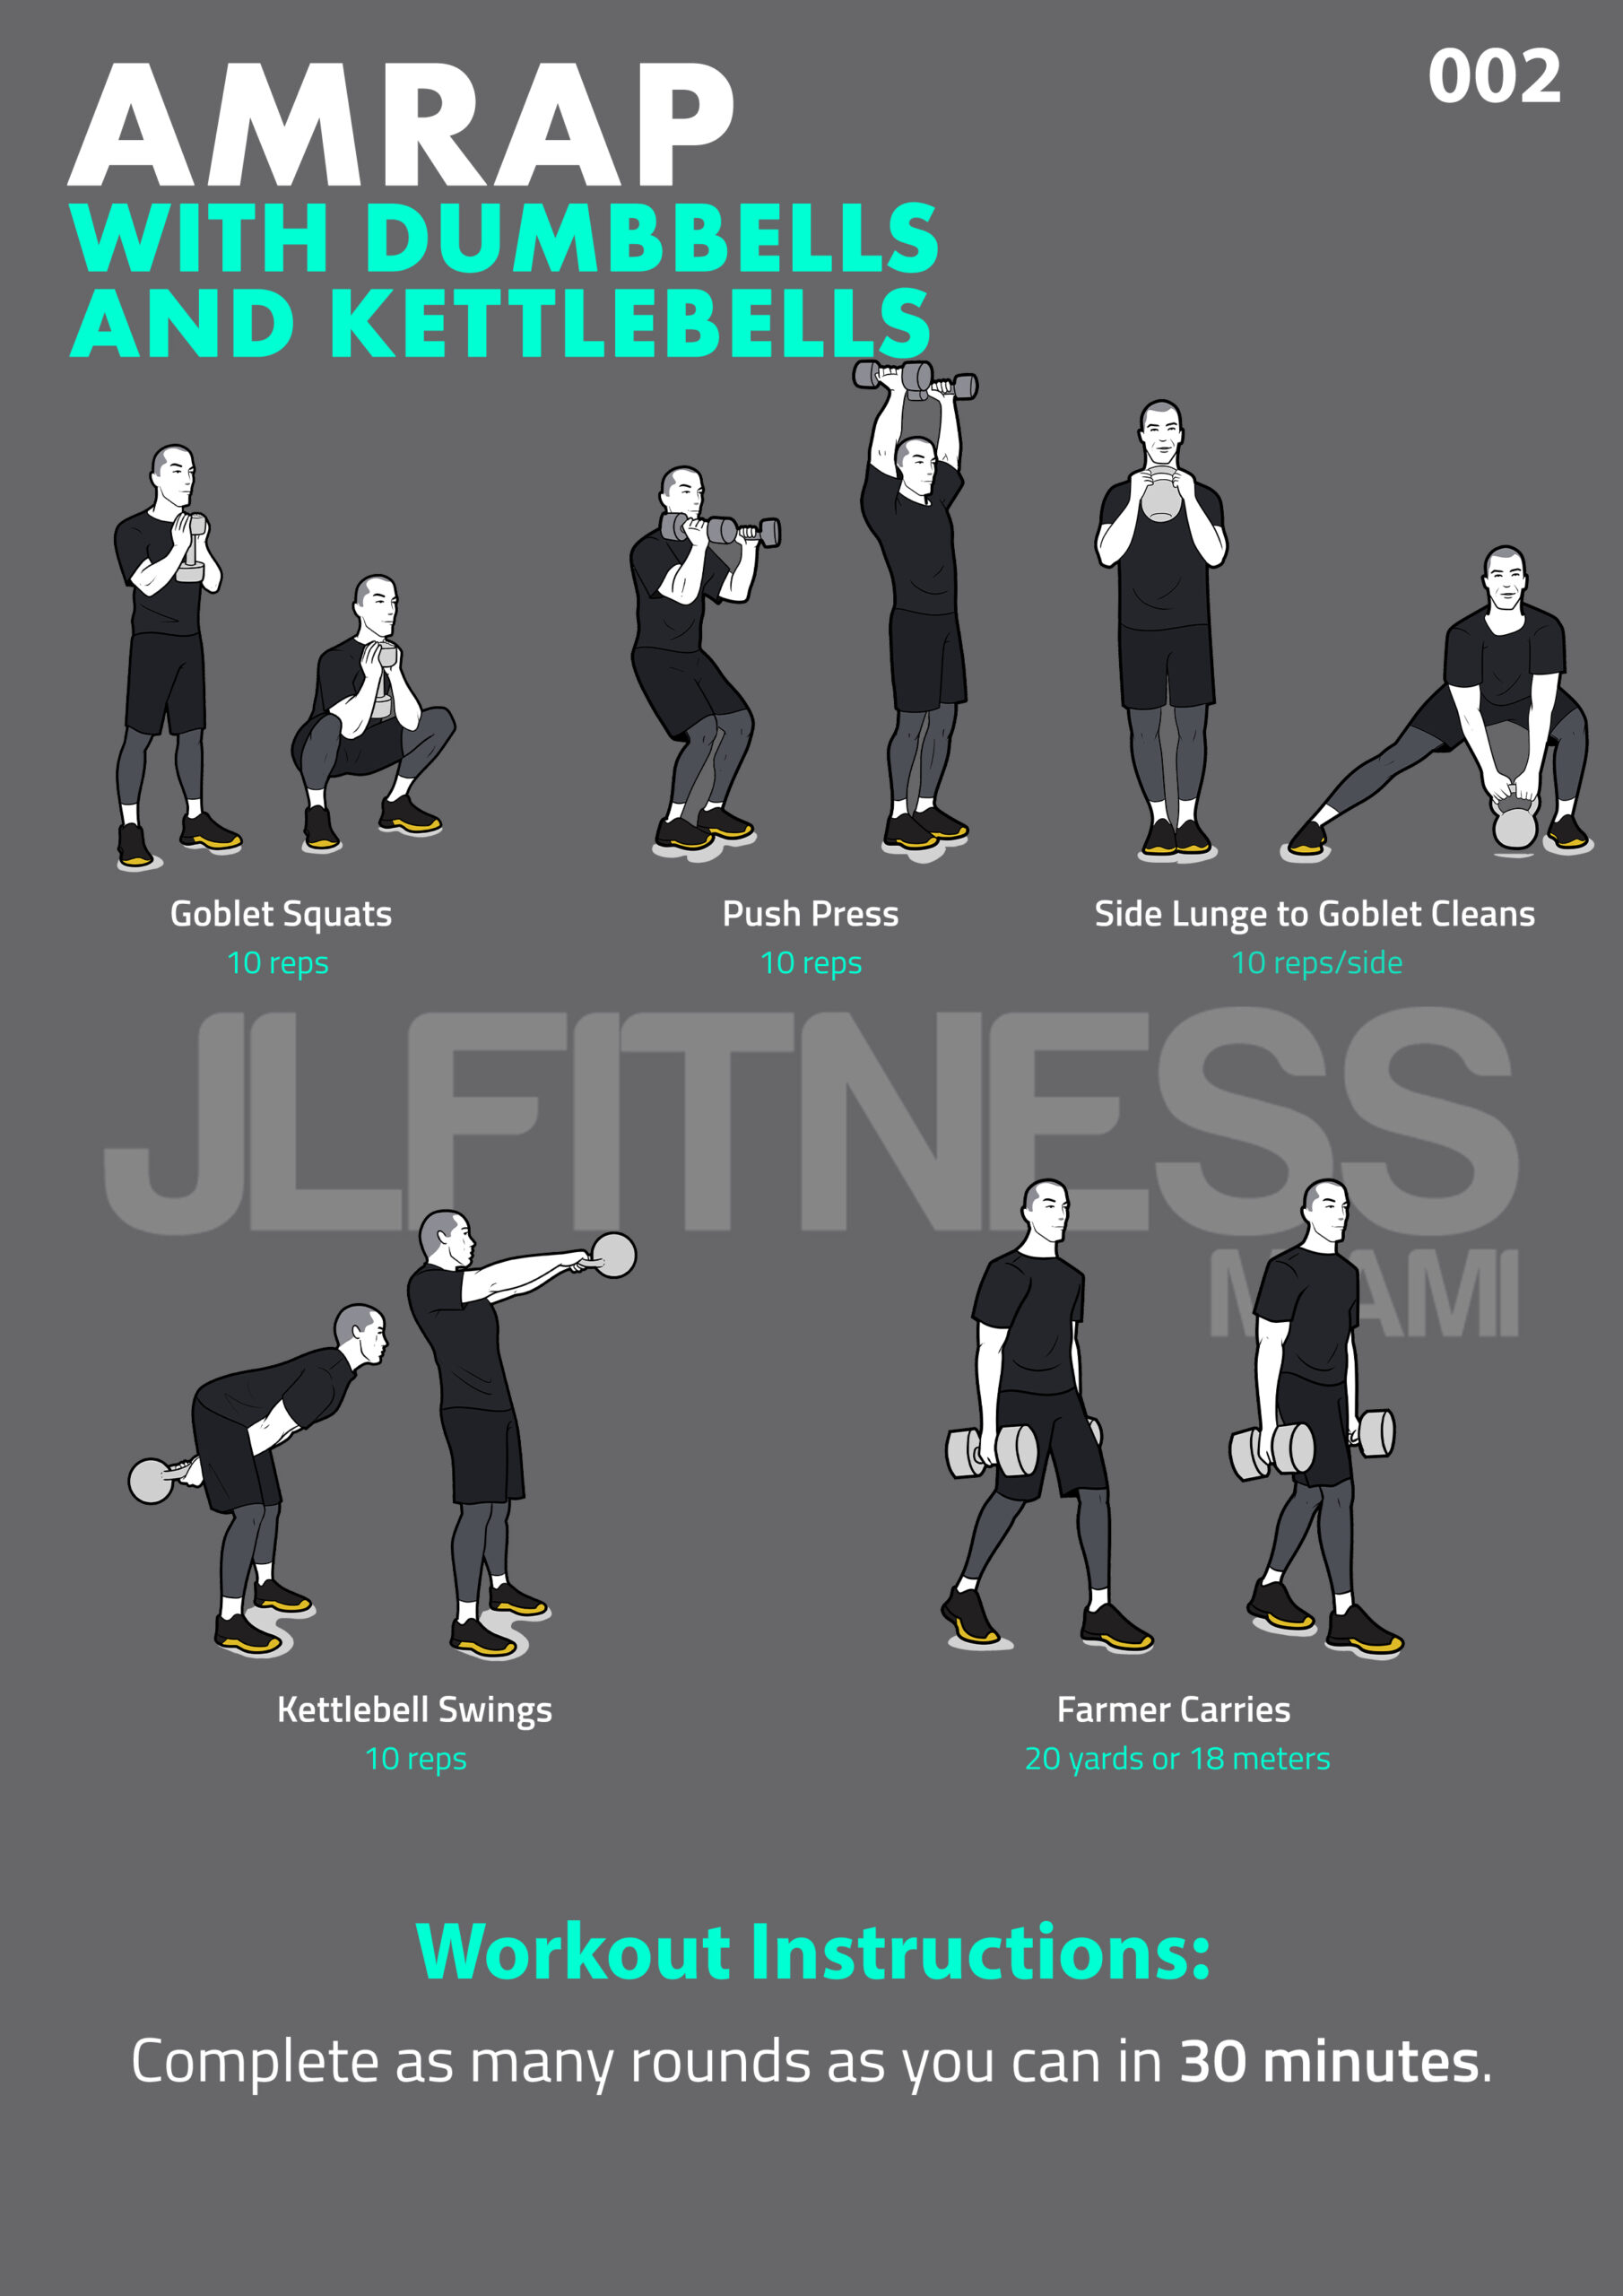 AMRAP with dumbbells and kettlebells